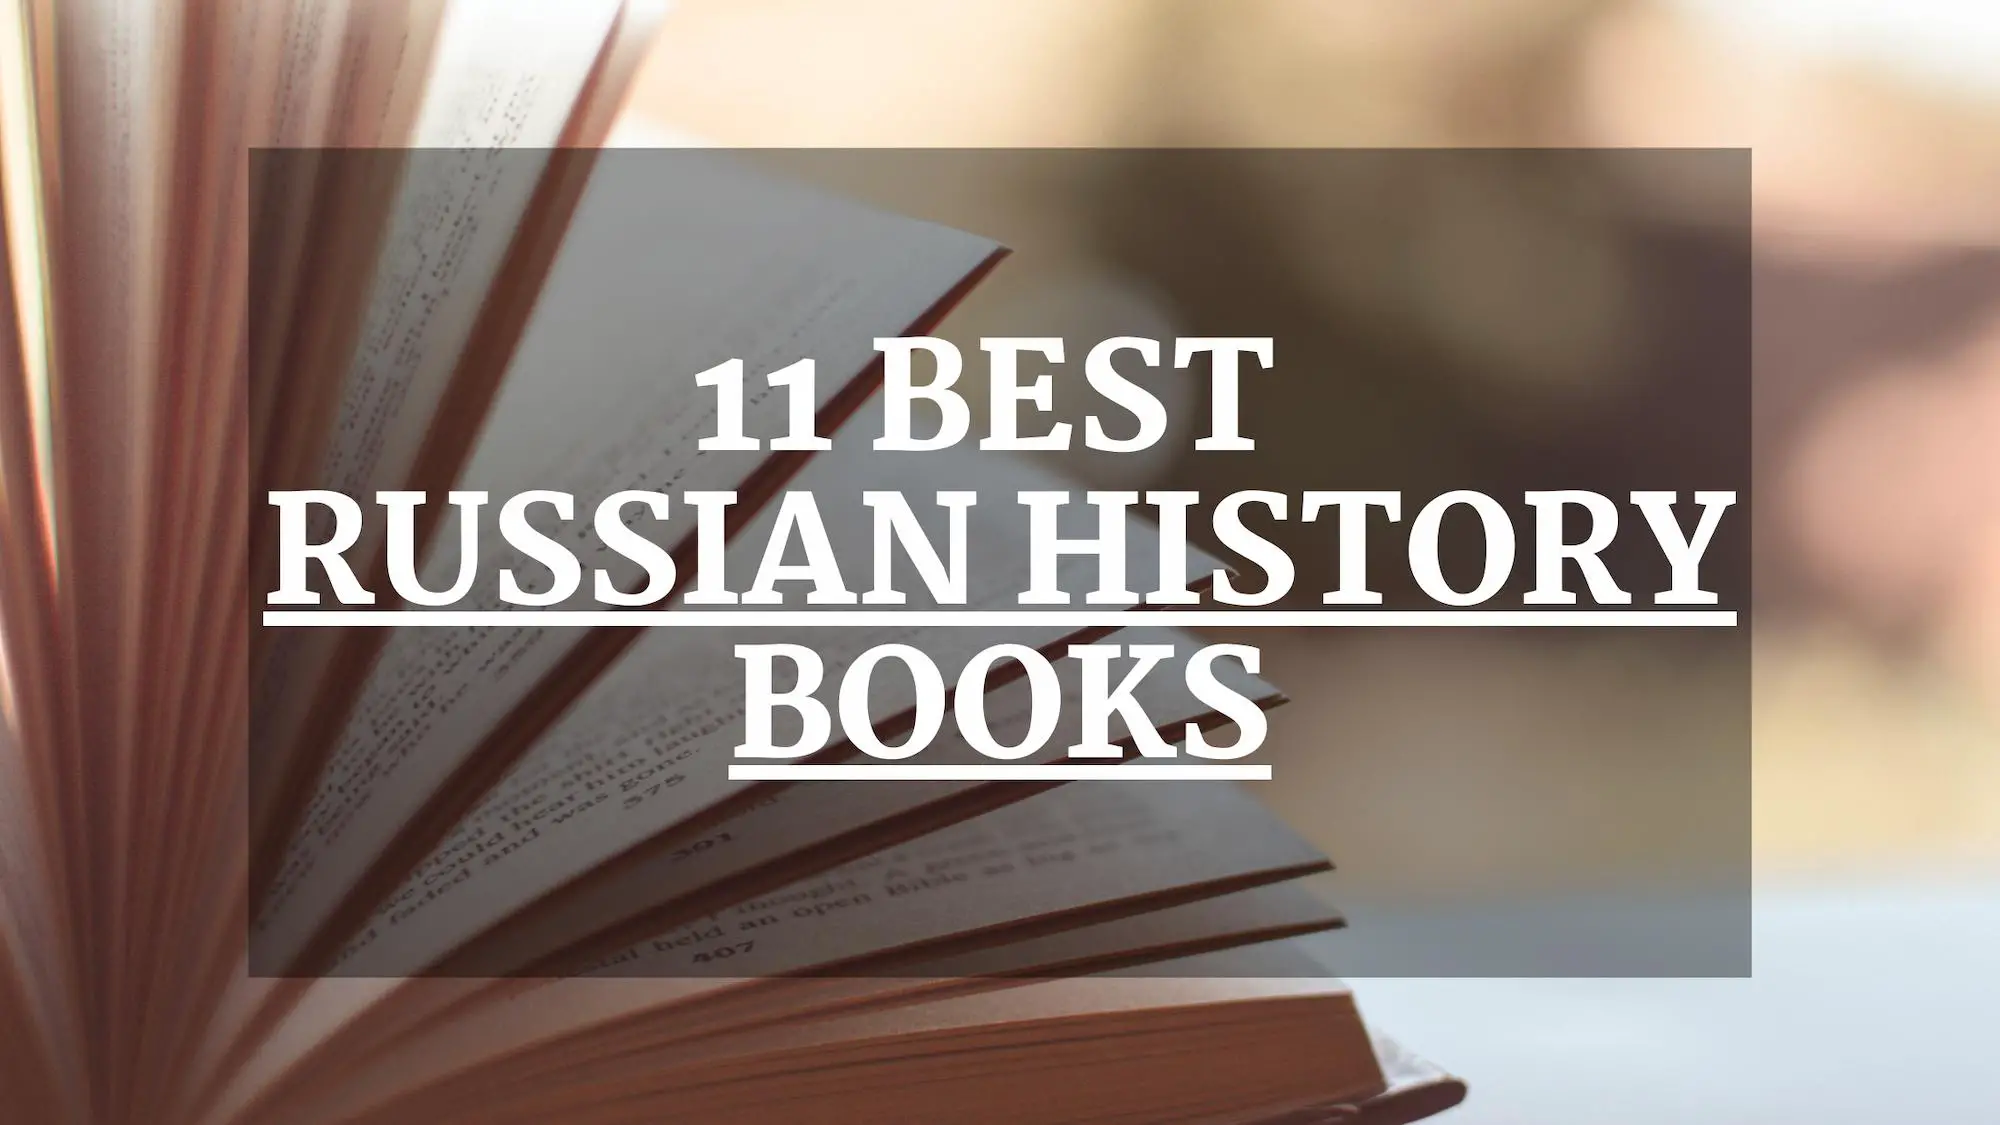 Top Russian history books